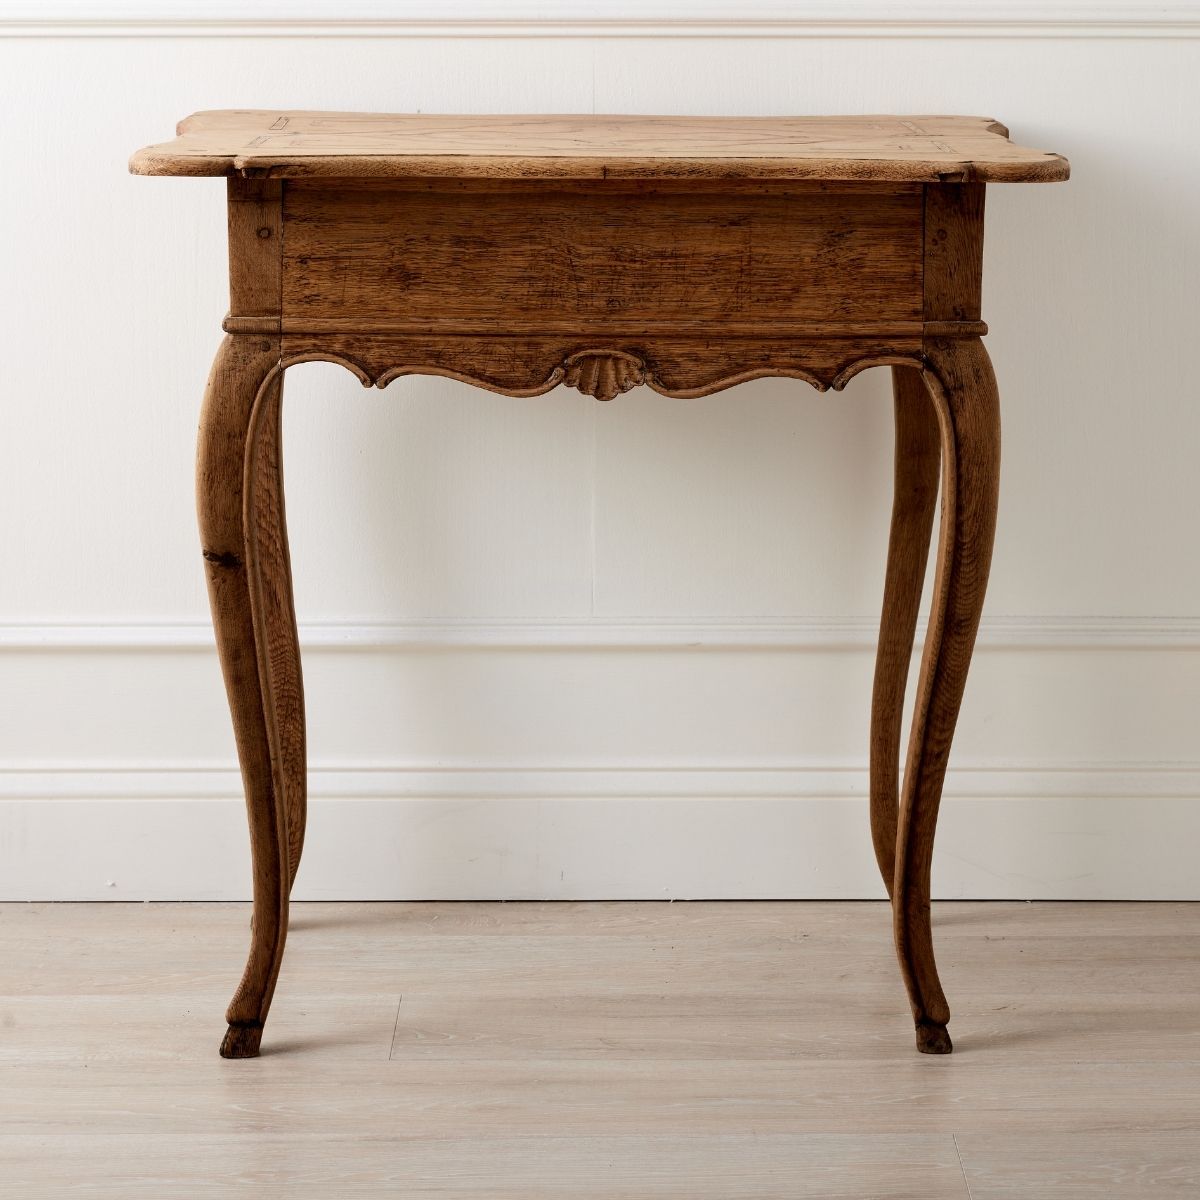 Rococo Provincial Wooden Side Table w/ Drawer - Caitlin Wilson Design